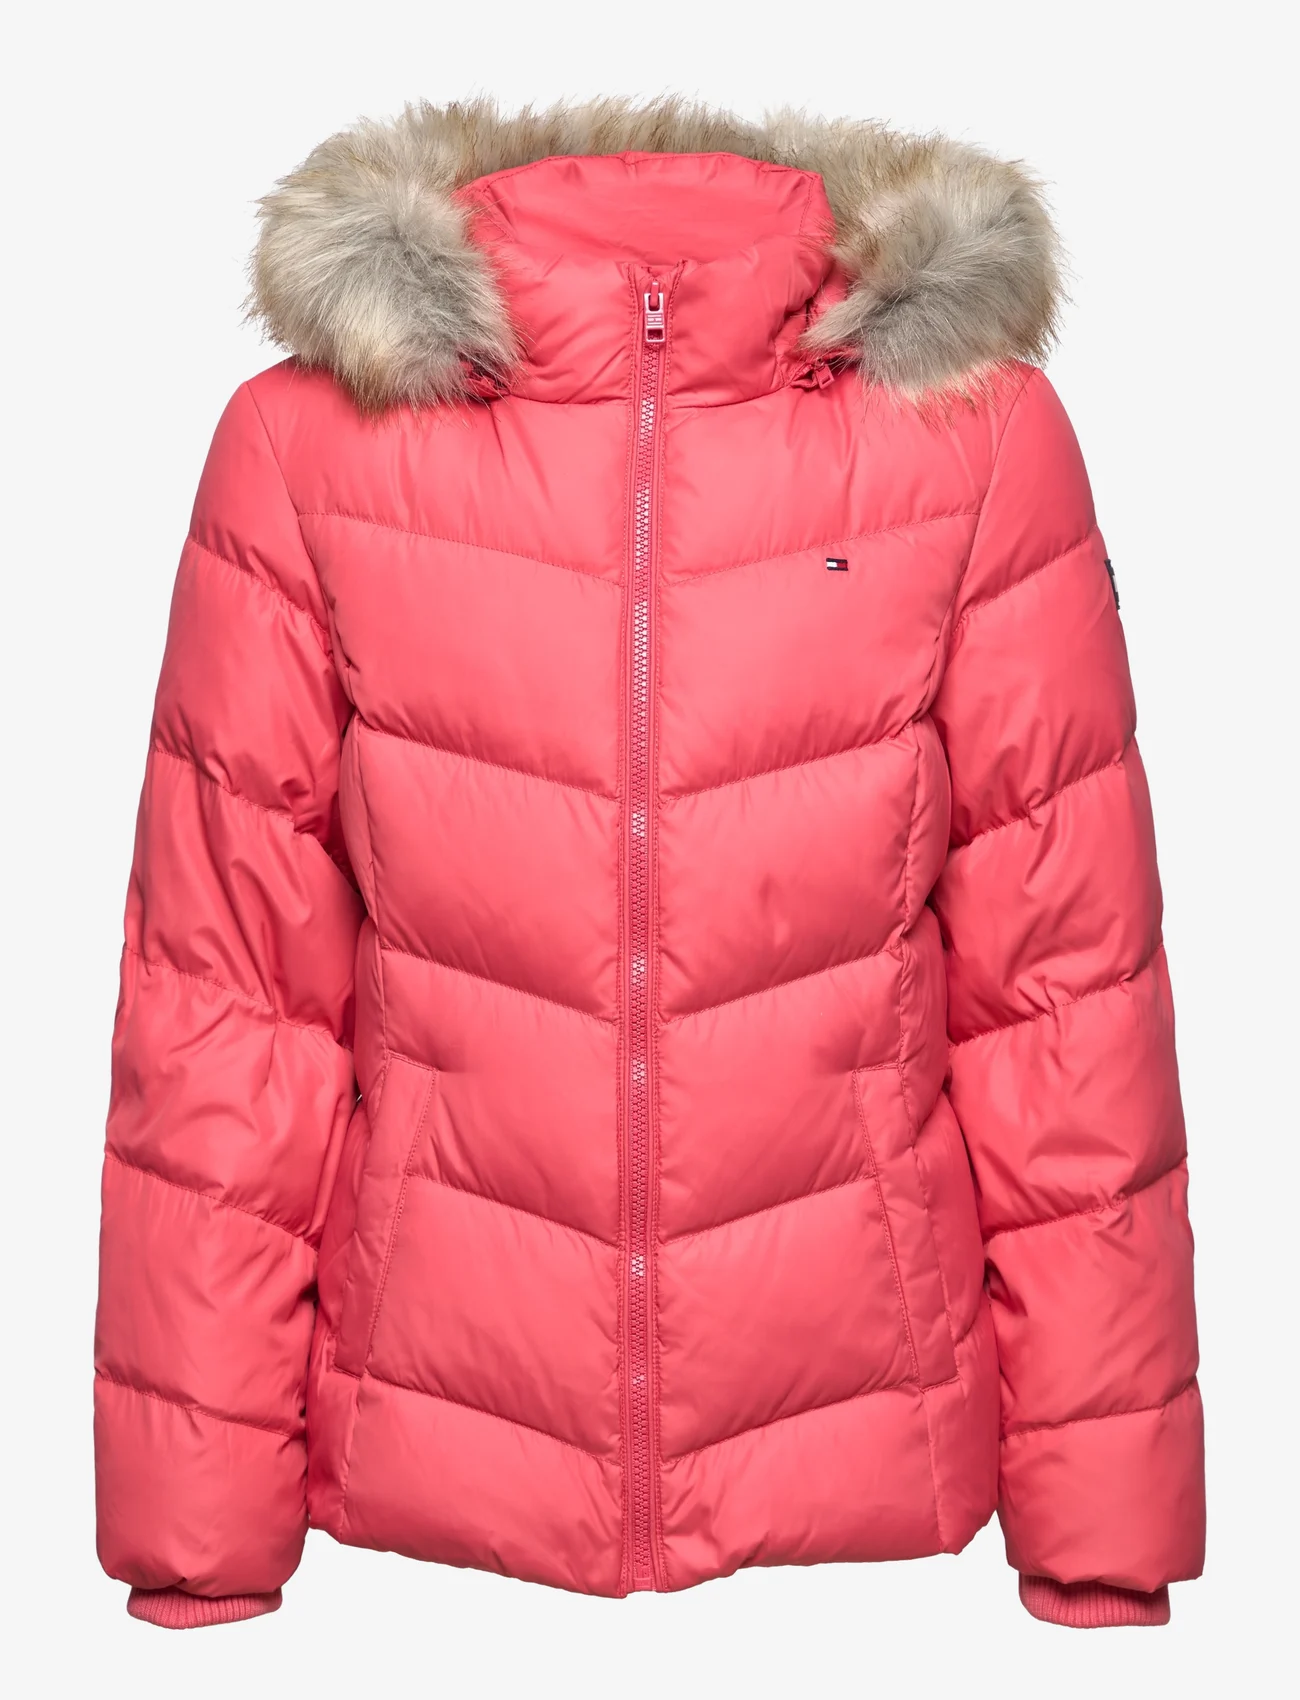 zweep hand medaillewinnaar Tommy Hilfiger Essential Down Jacket (Empire Pink), (90.96 €) | Large  selection of outlet-styles | Booztlet.com